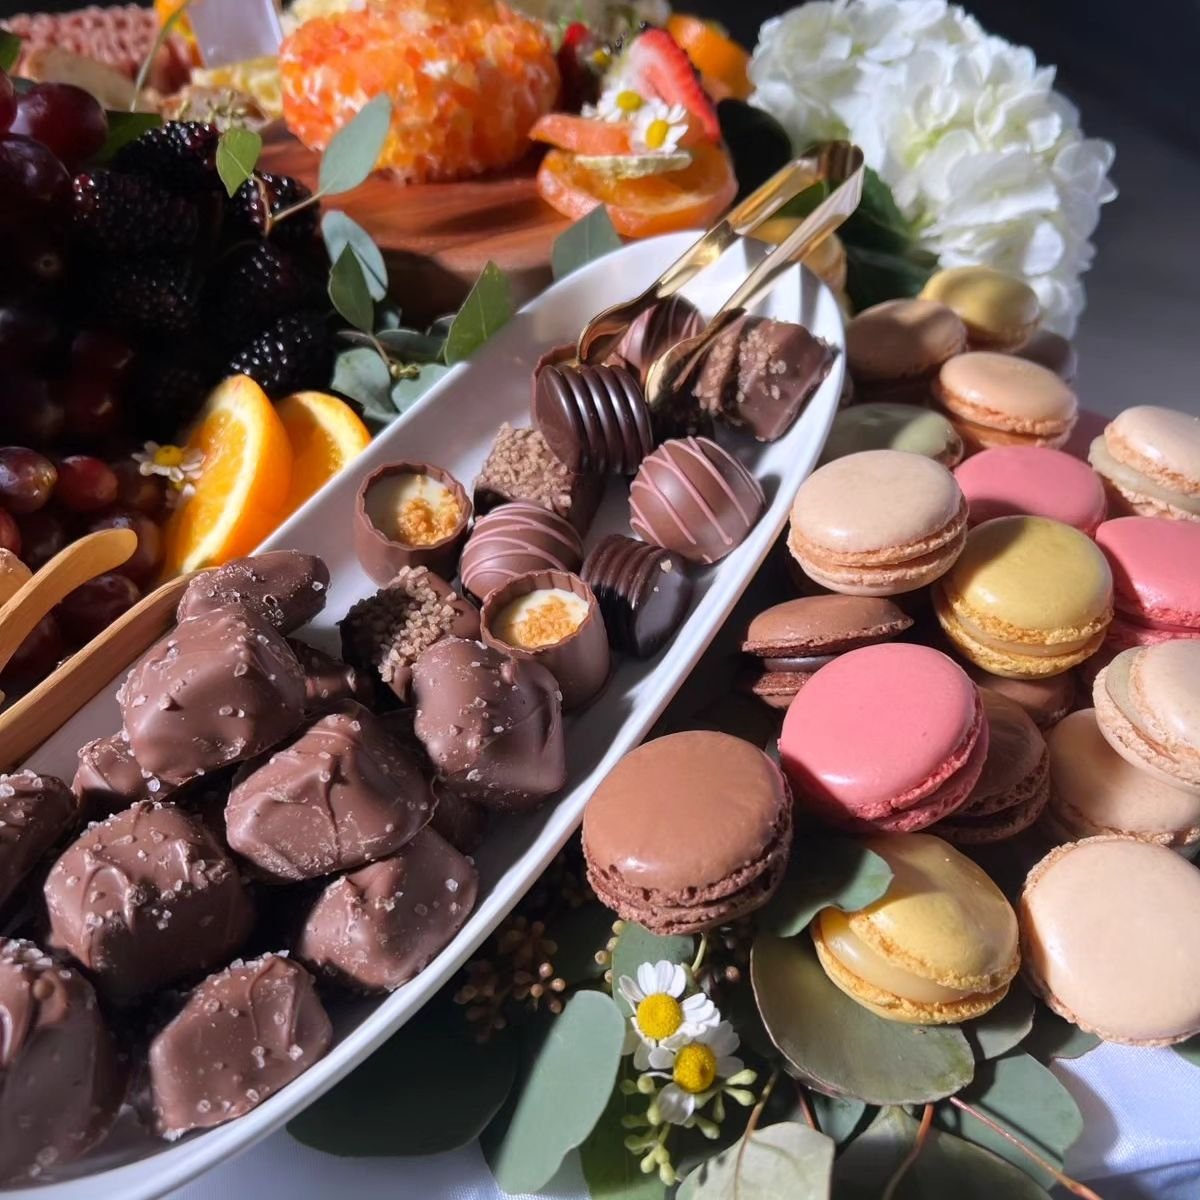 Did you know that almost every @gatheringfeast grazing table includes a sweets corner? 🍪🍫🍬

#gatheringfeast #grazing #grazigntable #cheeswboard #cheeseboard #charcuterieboard #charcuterie #catered #catering #womanownedbusiness #smallbusiness #food